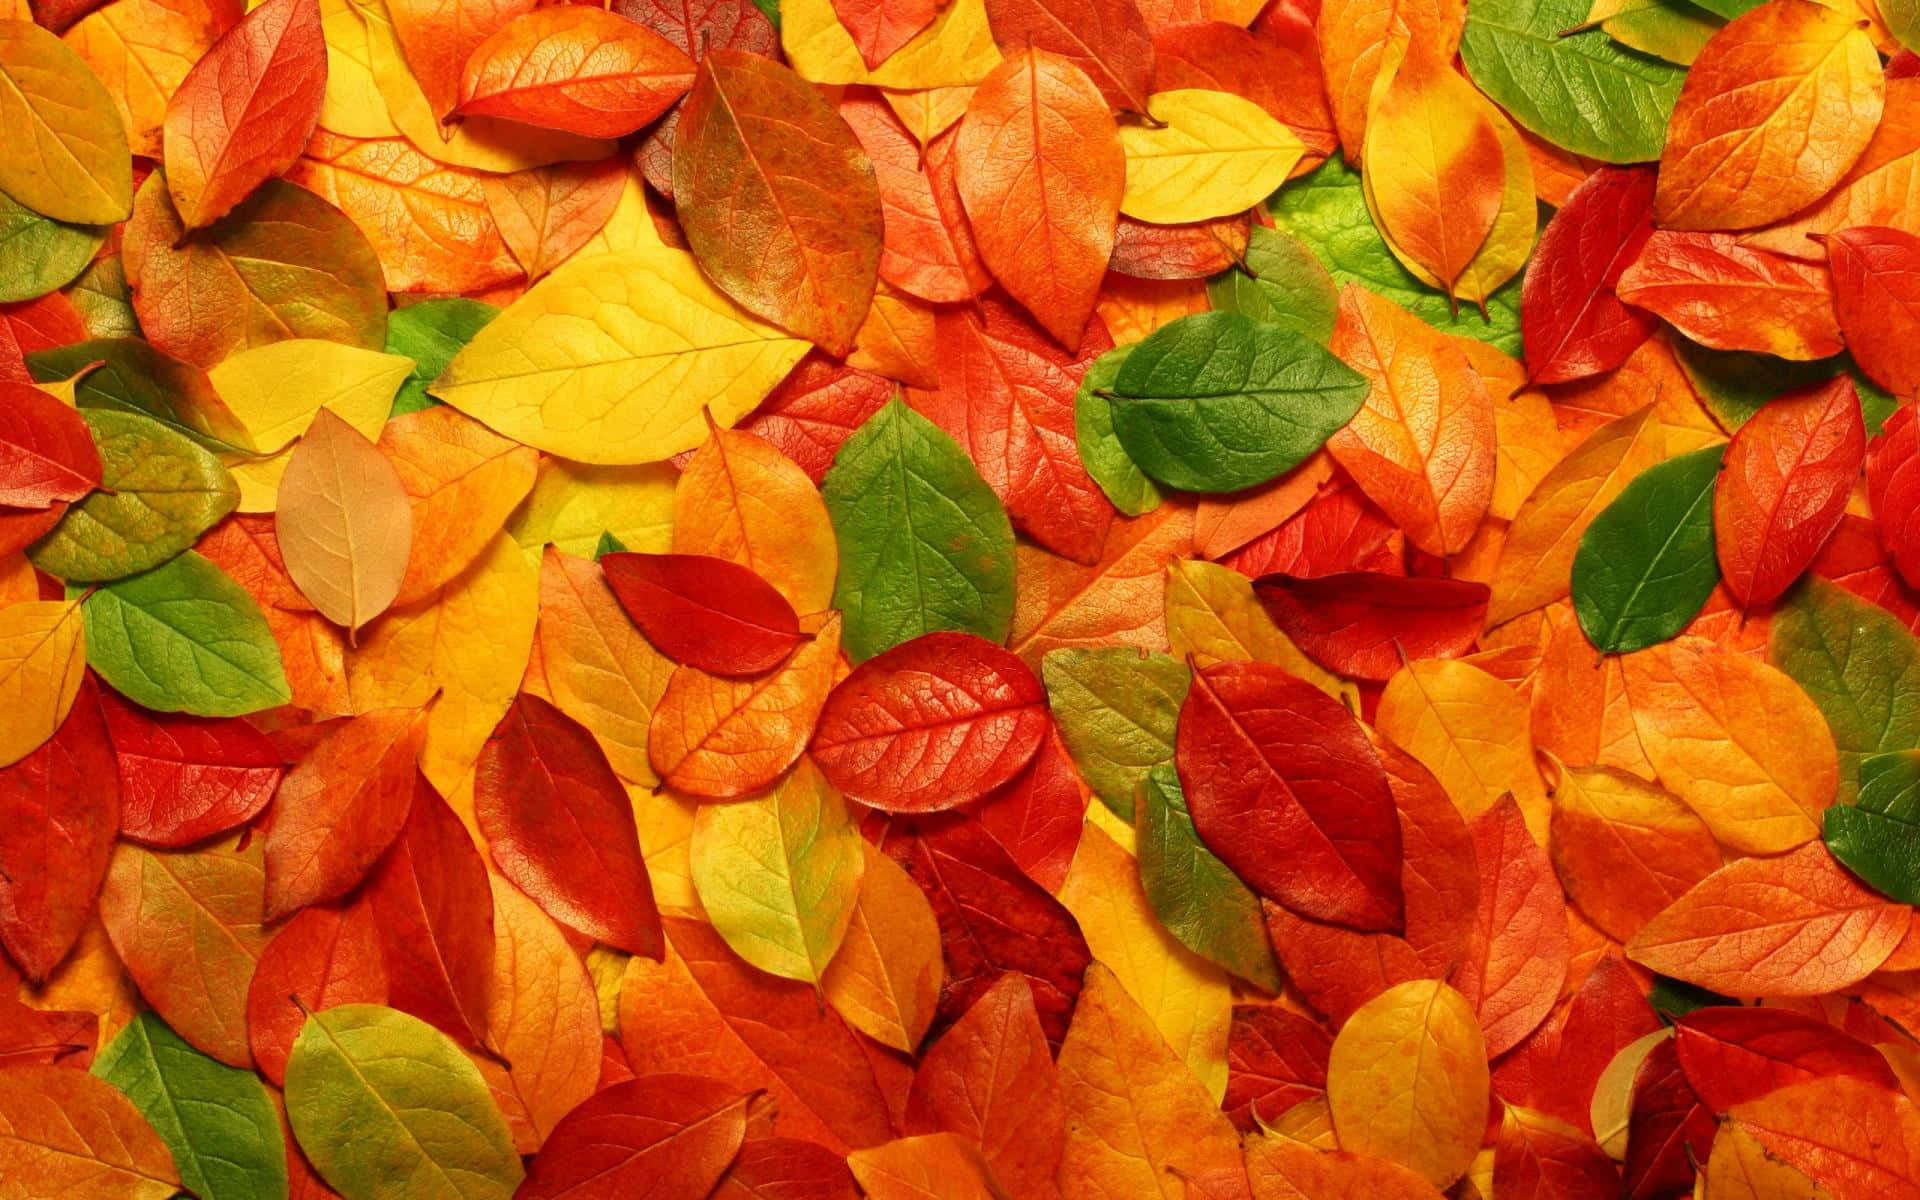 Autumn Leaves In A Pile